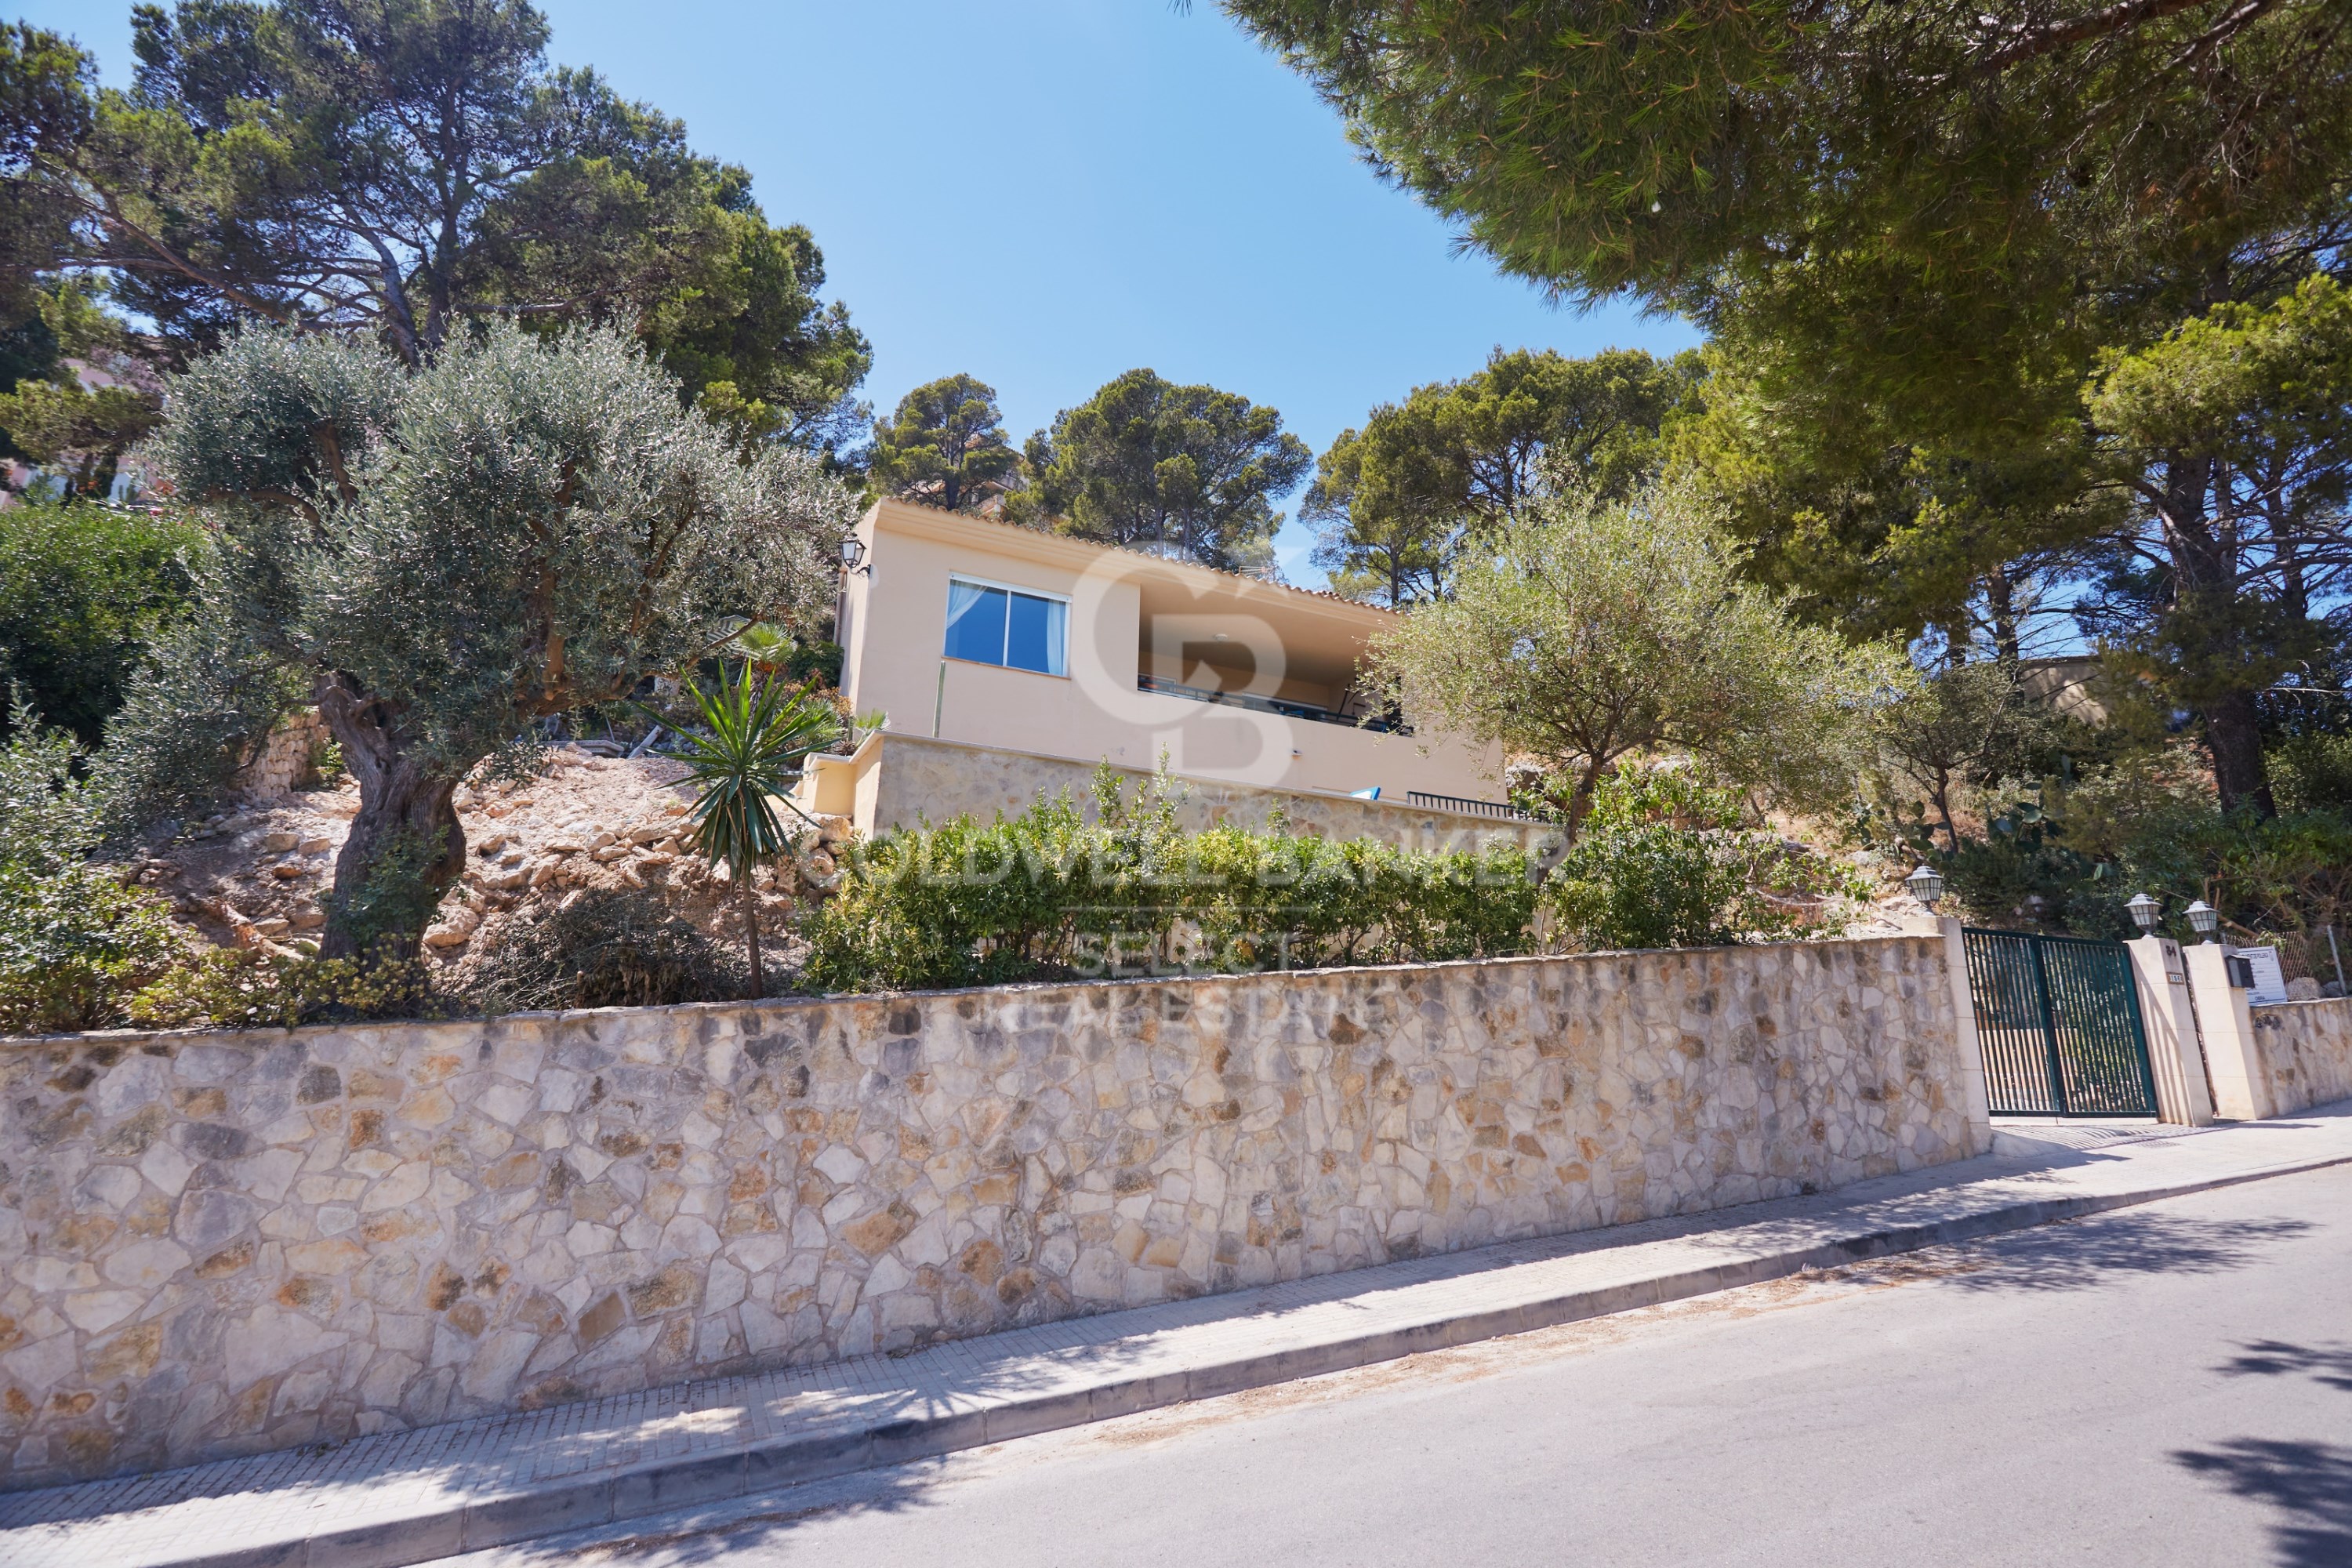 Detached house for sale with views of the Bay of Pollenca